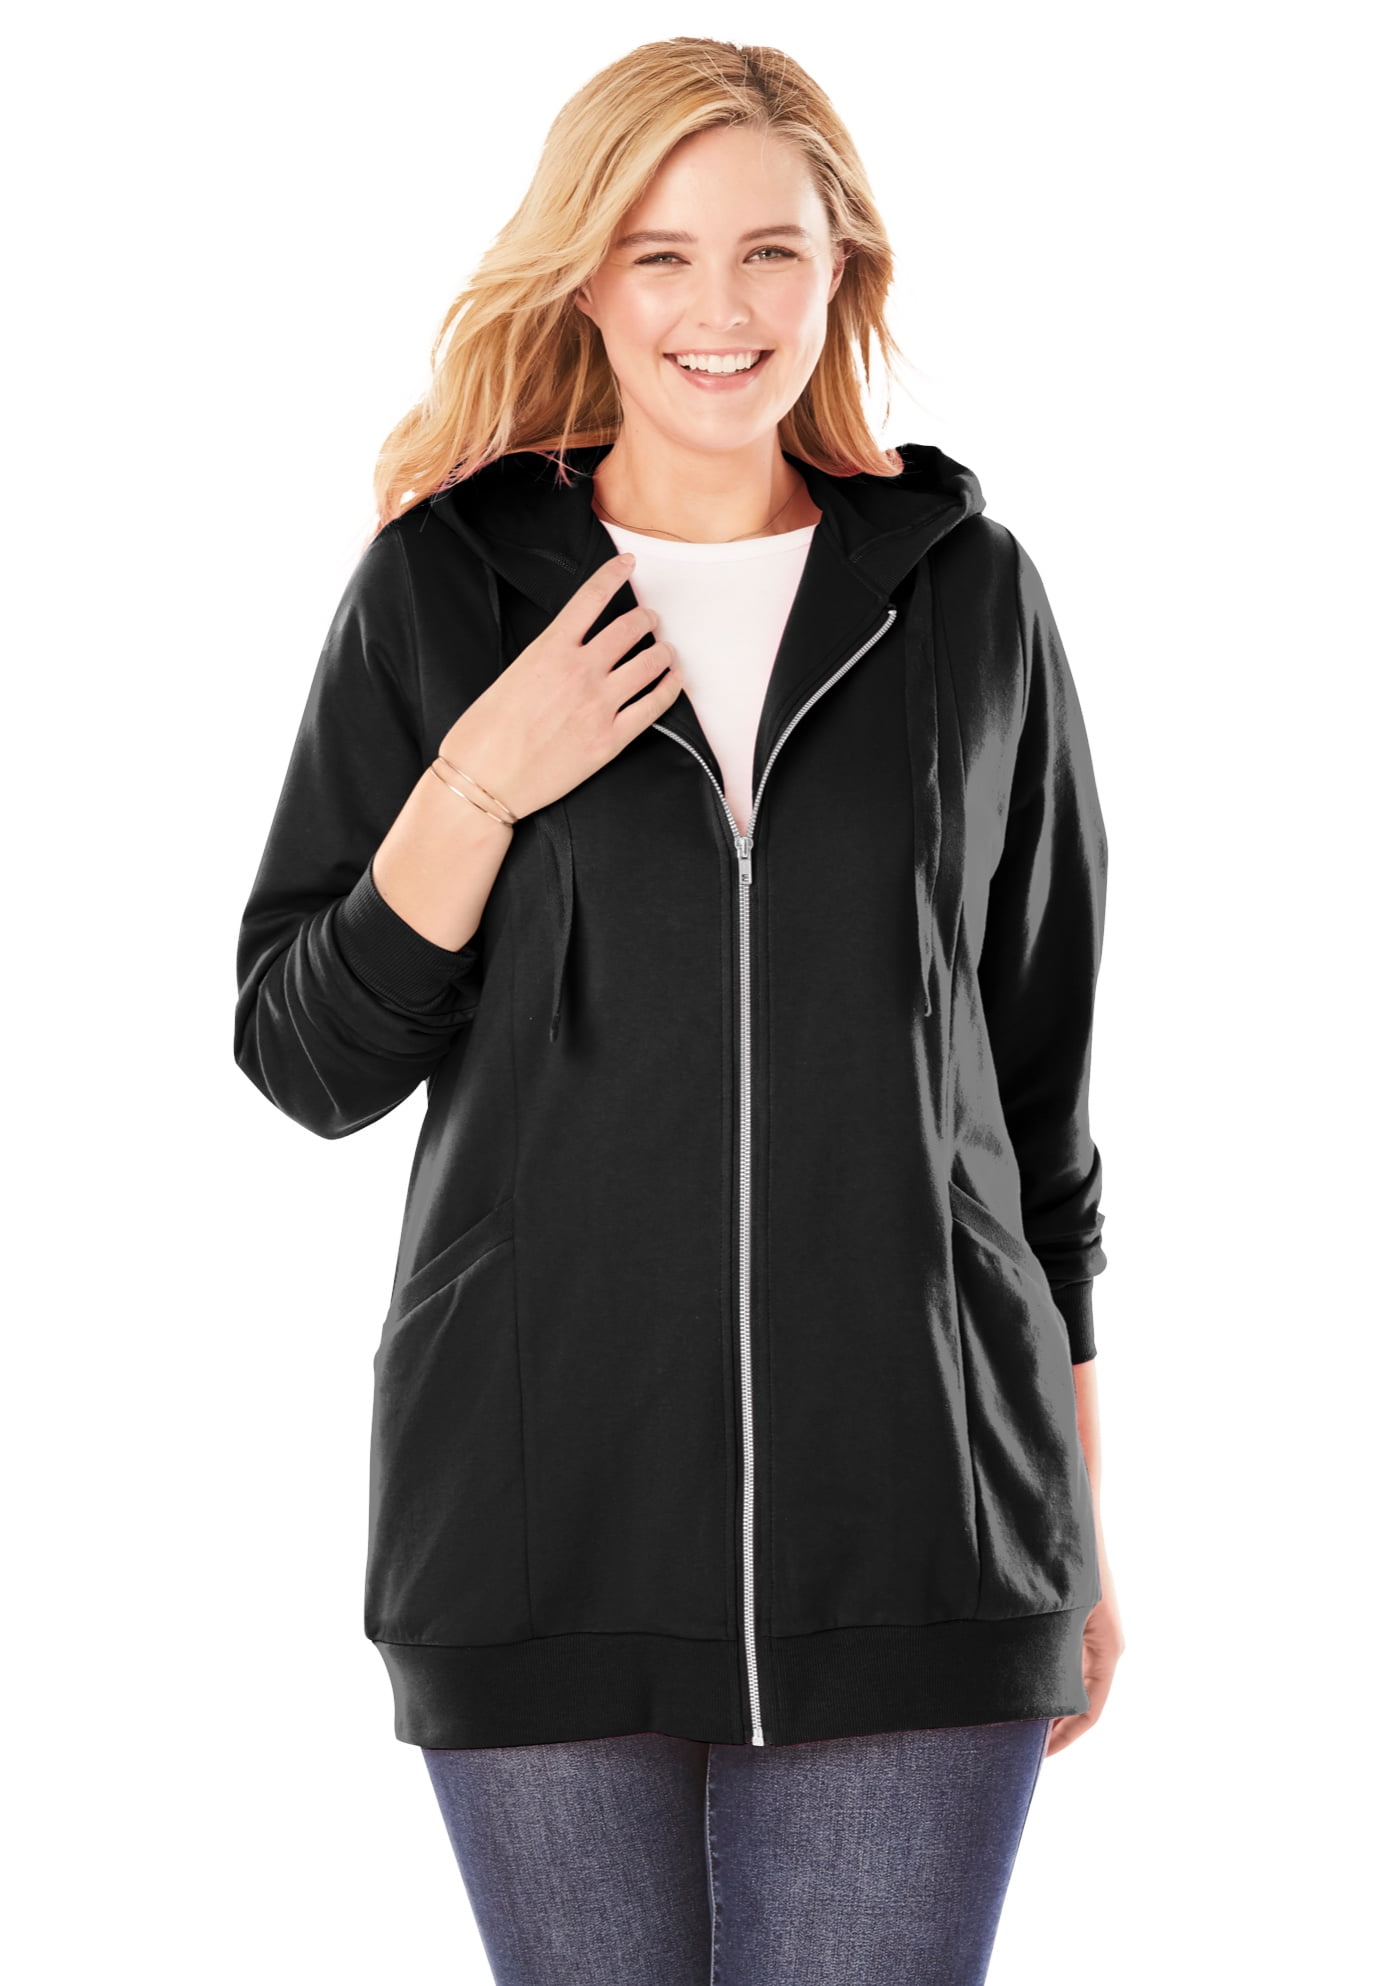 Woman Within - Woman Within Women's Plus Size Zip Front Tunic Hoodie ...